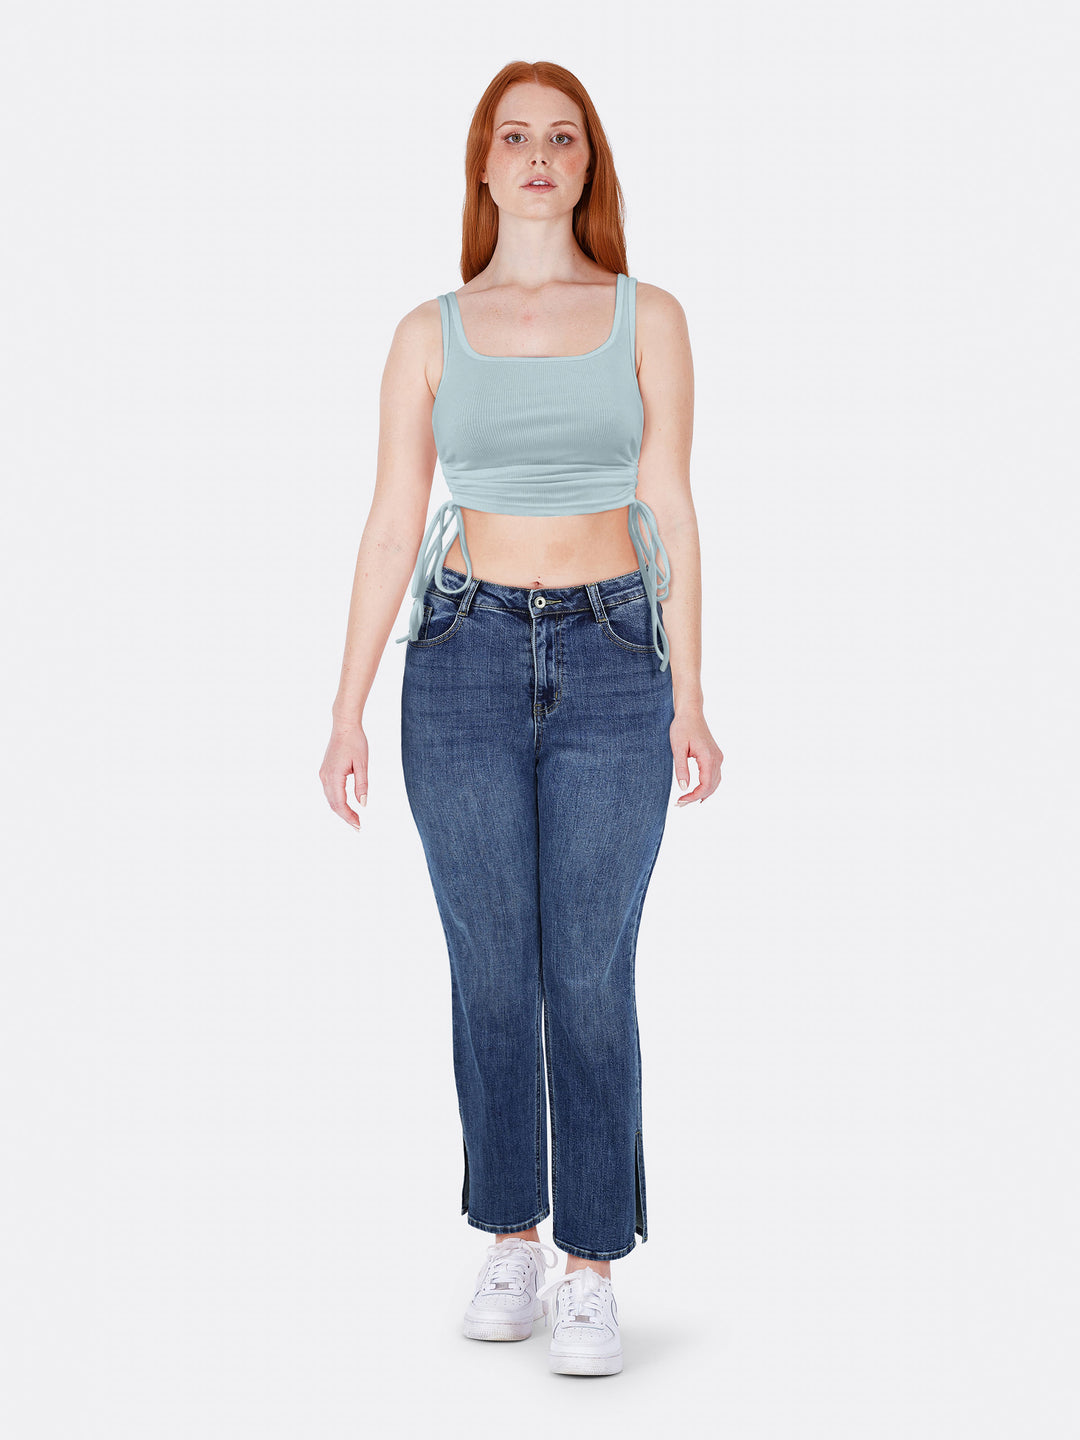 Strappy Top with Gathered Sides Blue Front | Jolovies